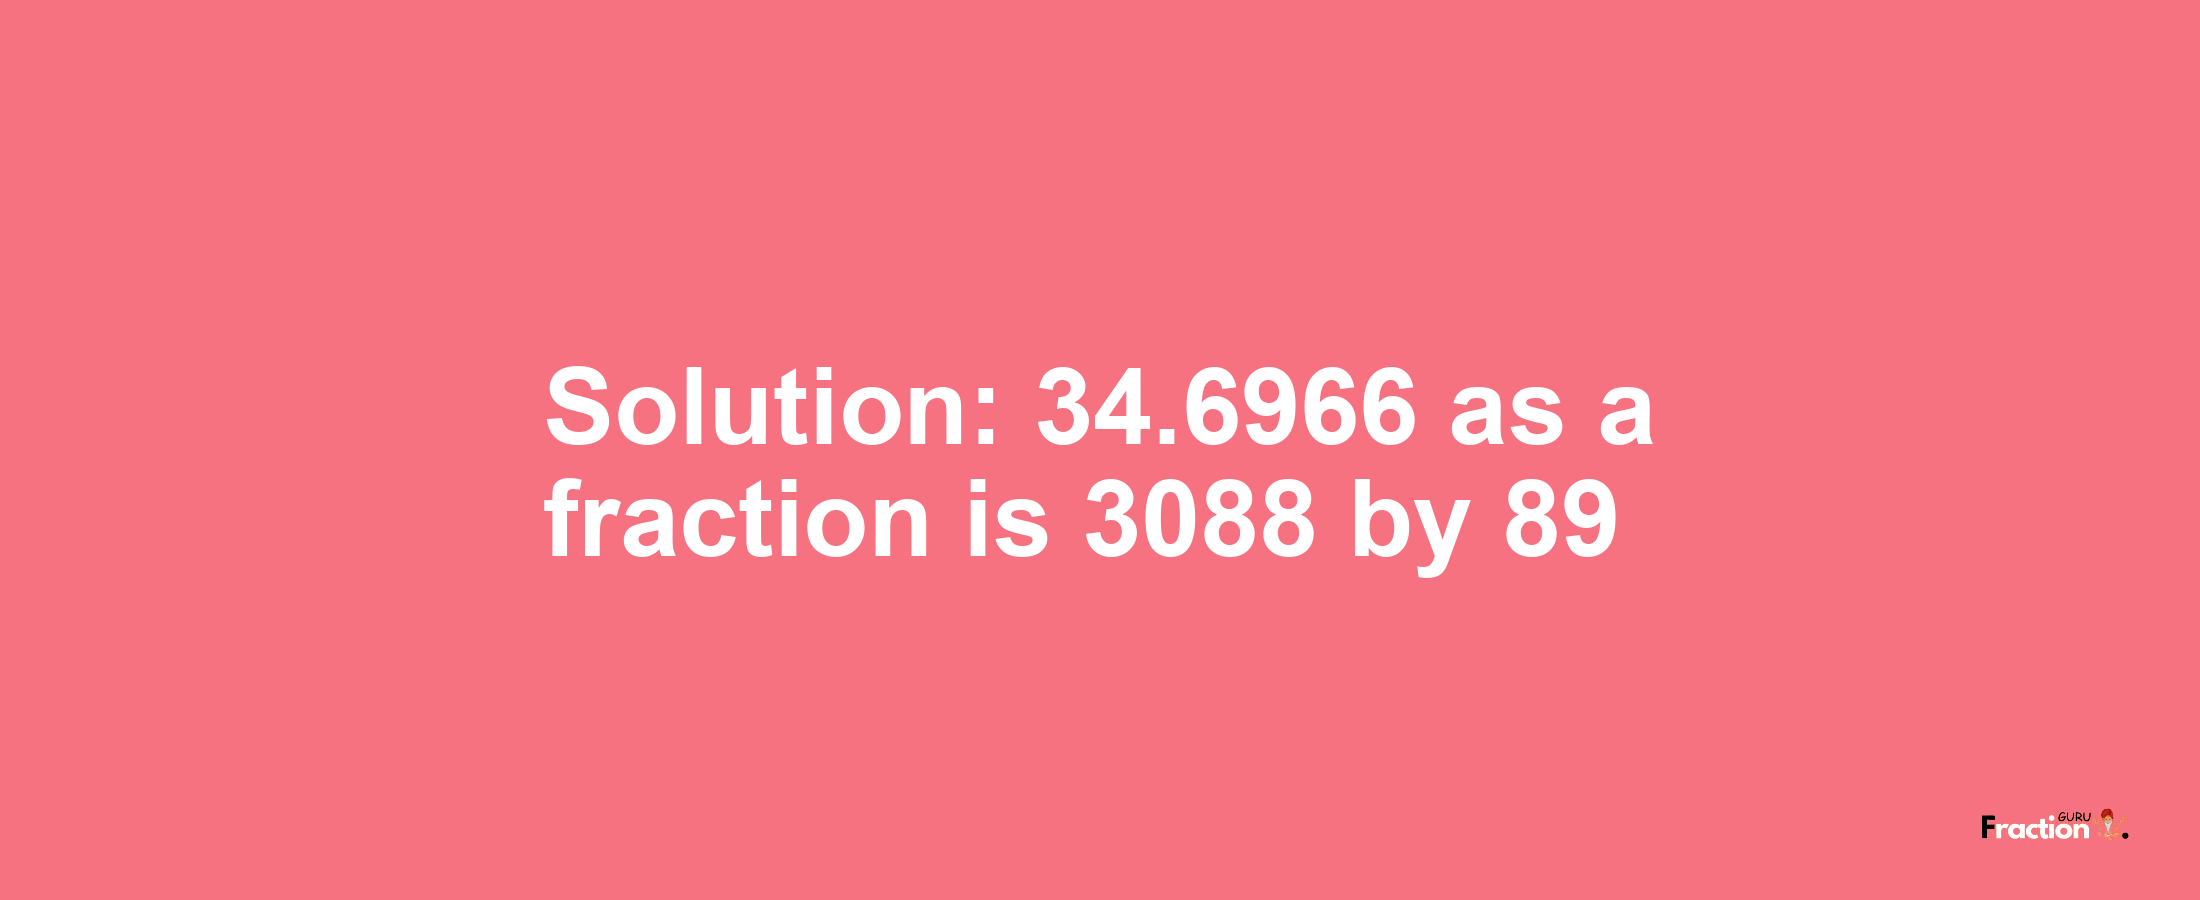 Solution:34.6966 as a fraction is 3088/89